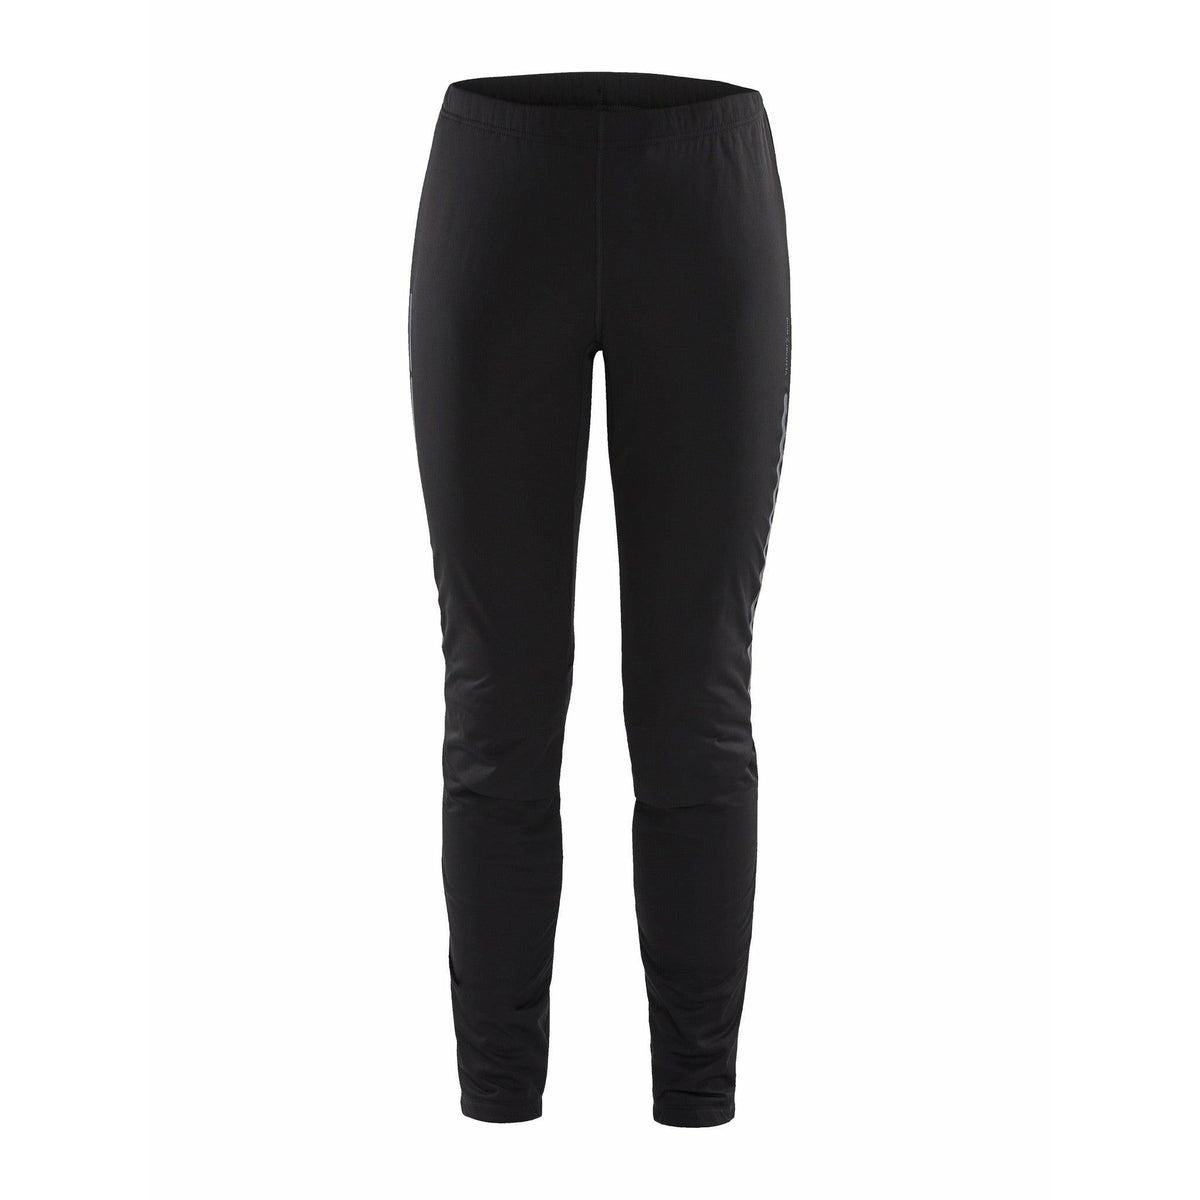 Craft Women's Storm Balance Tights - Pioneer Midwest